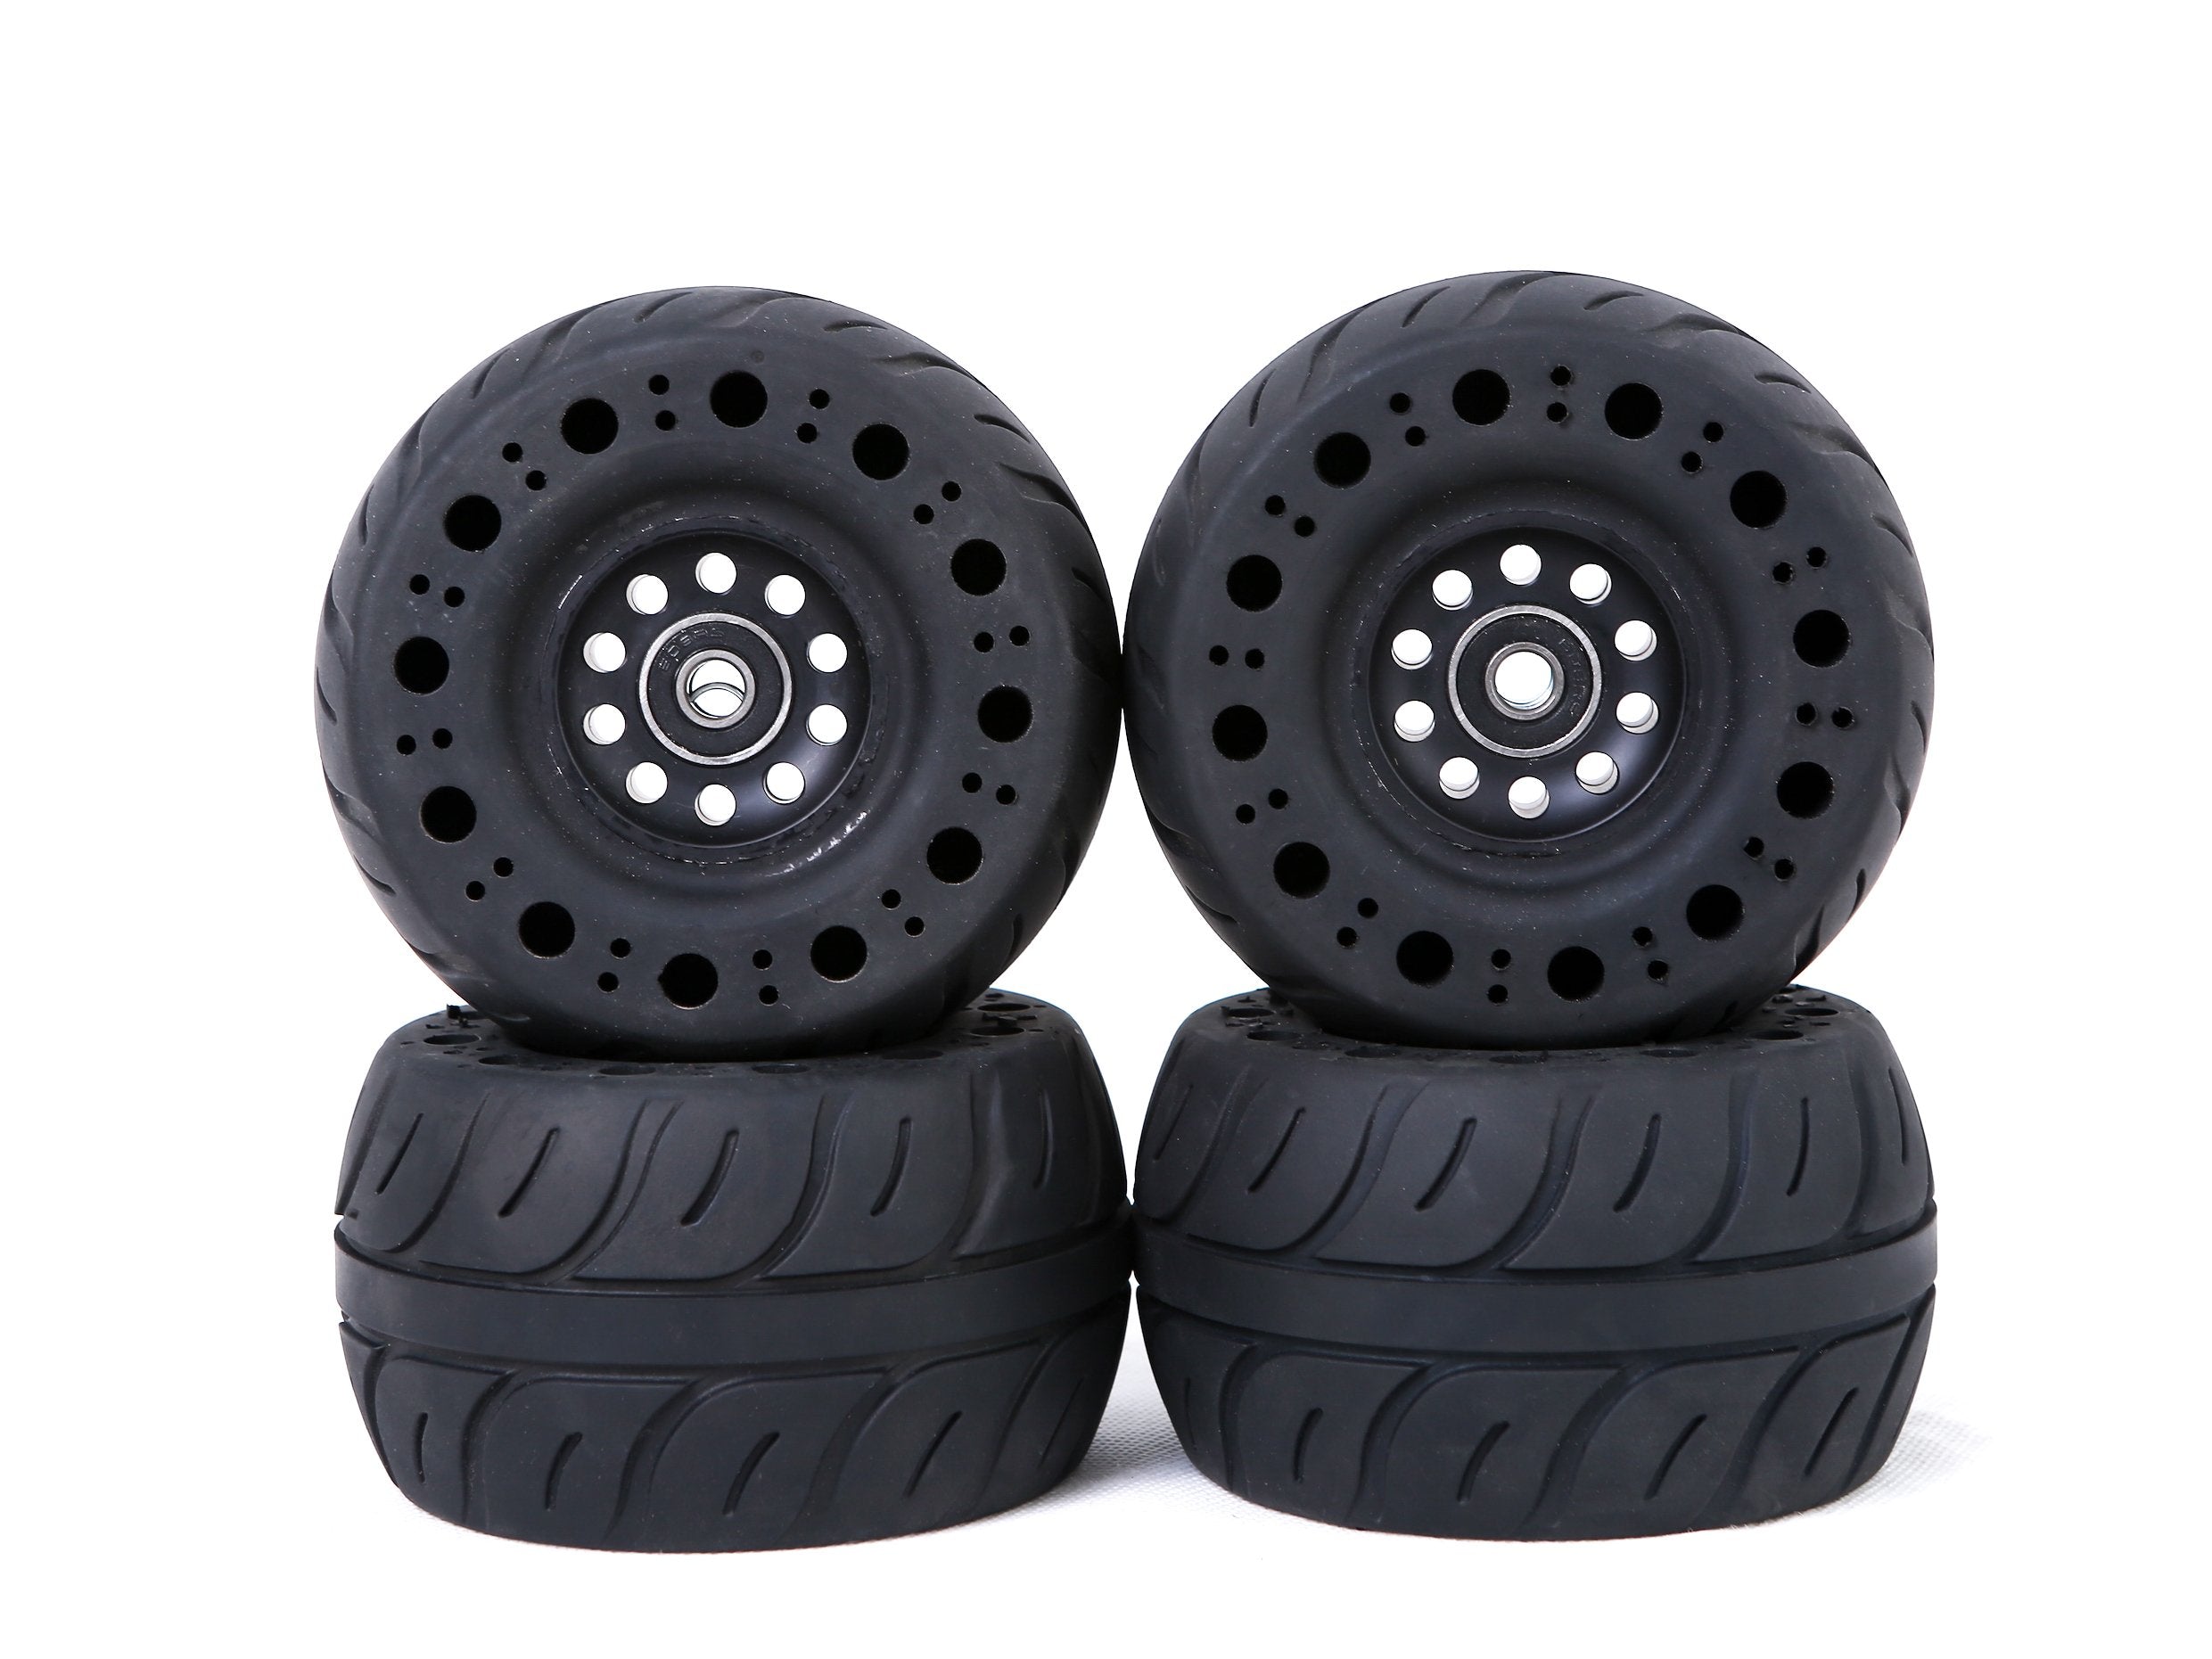 Electric Skateboard Wheels by ONSRA 115mm Rubber Airless Wheels